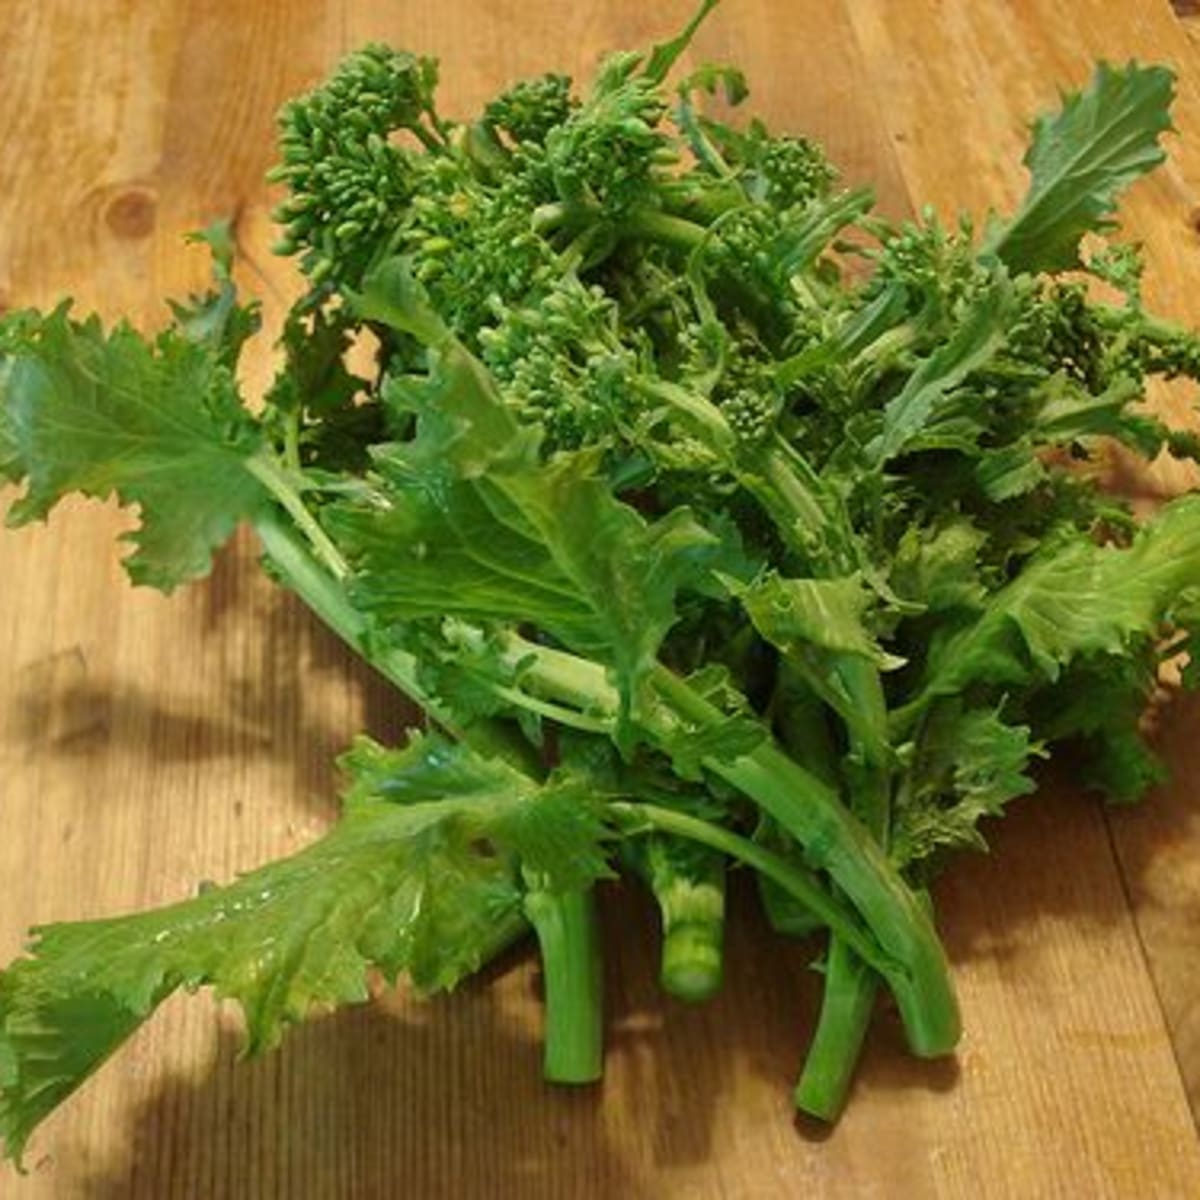 Broccoli Rabe Organic Authority,High Efficiency Washer And Dryer